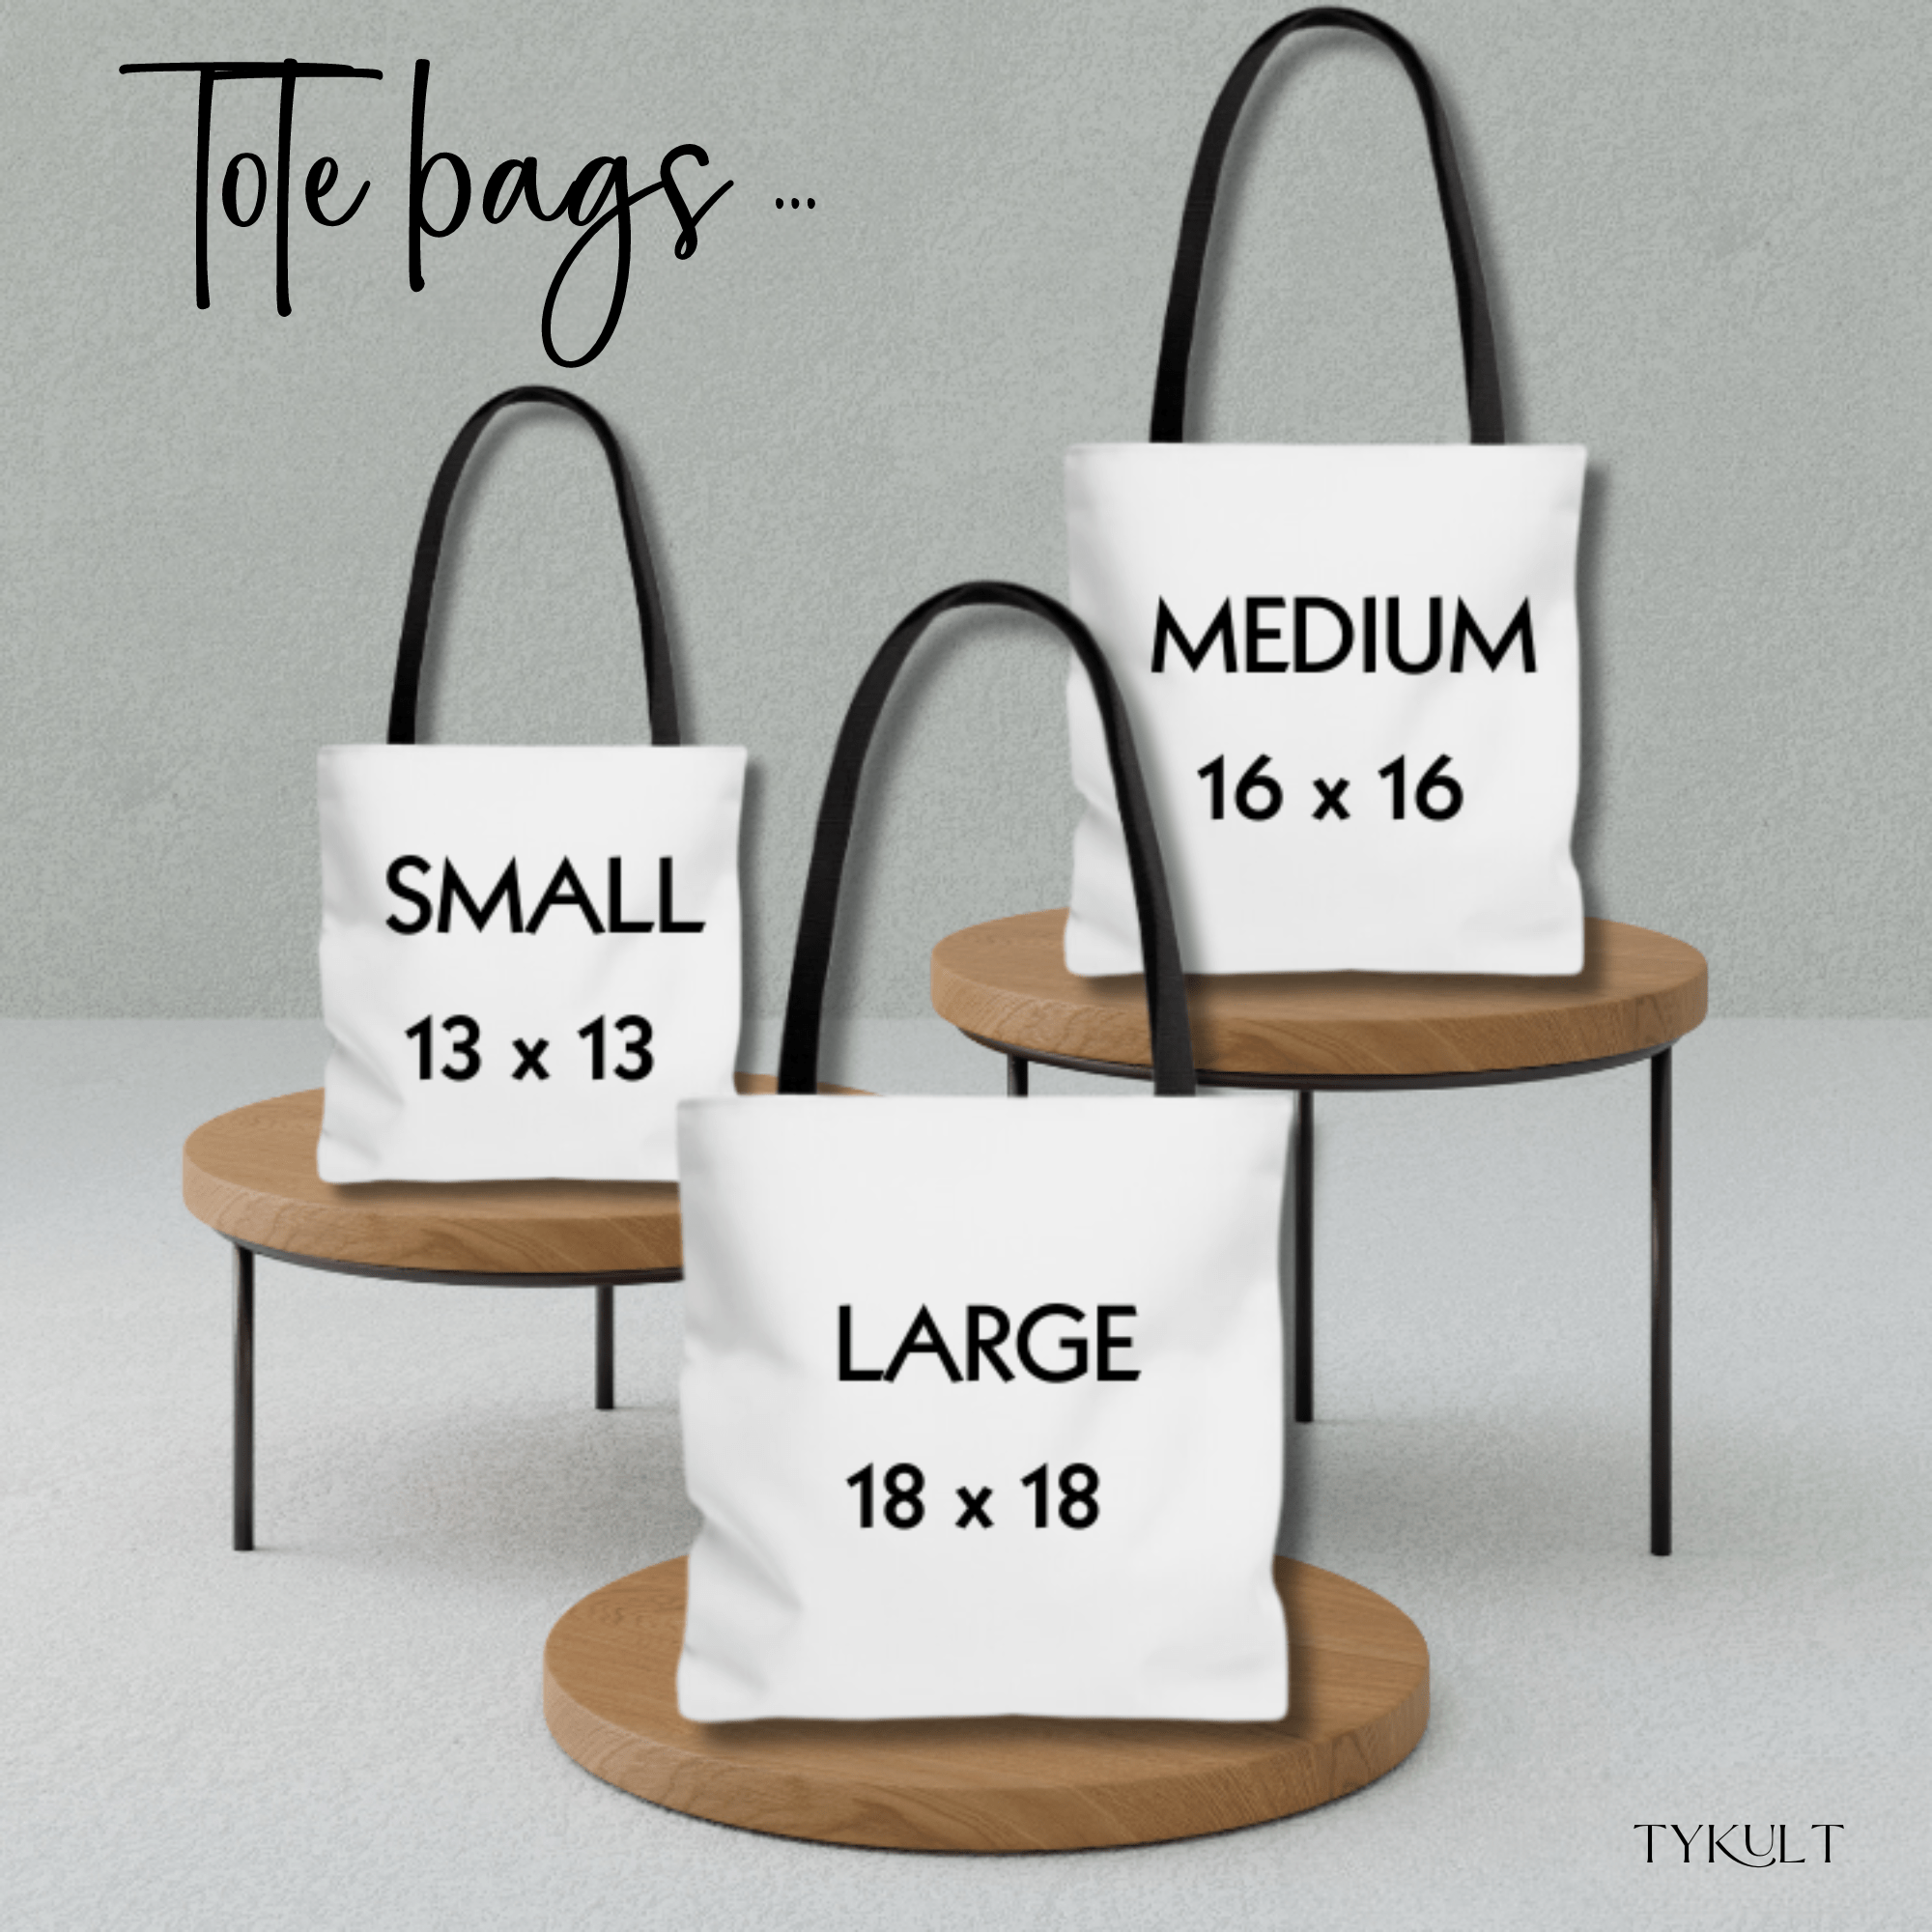 PERSONALIZABLE TOTE BAG | MONOGRAM - F | PERFECT GIFT for BFF, SISTER, CO-WORKER